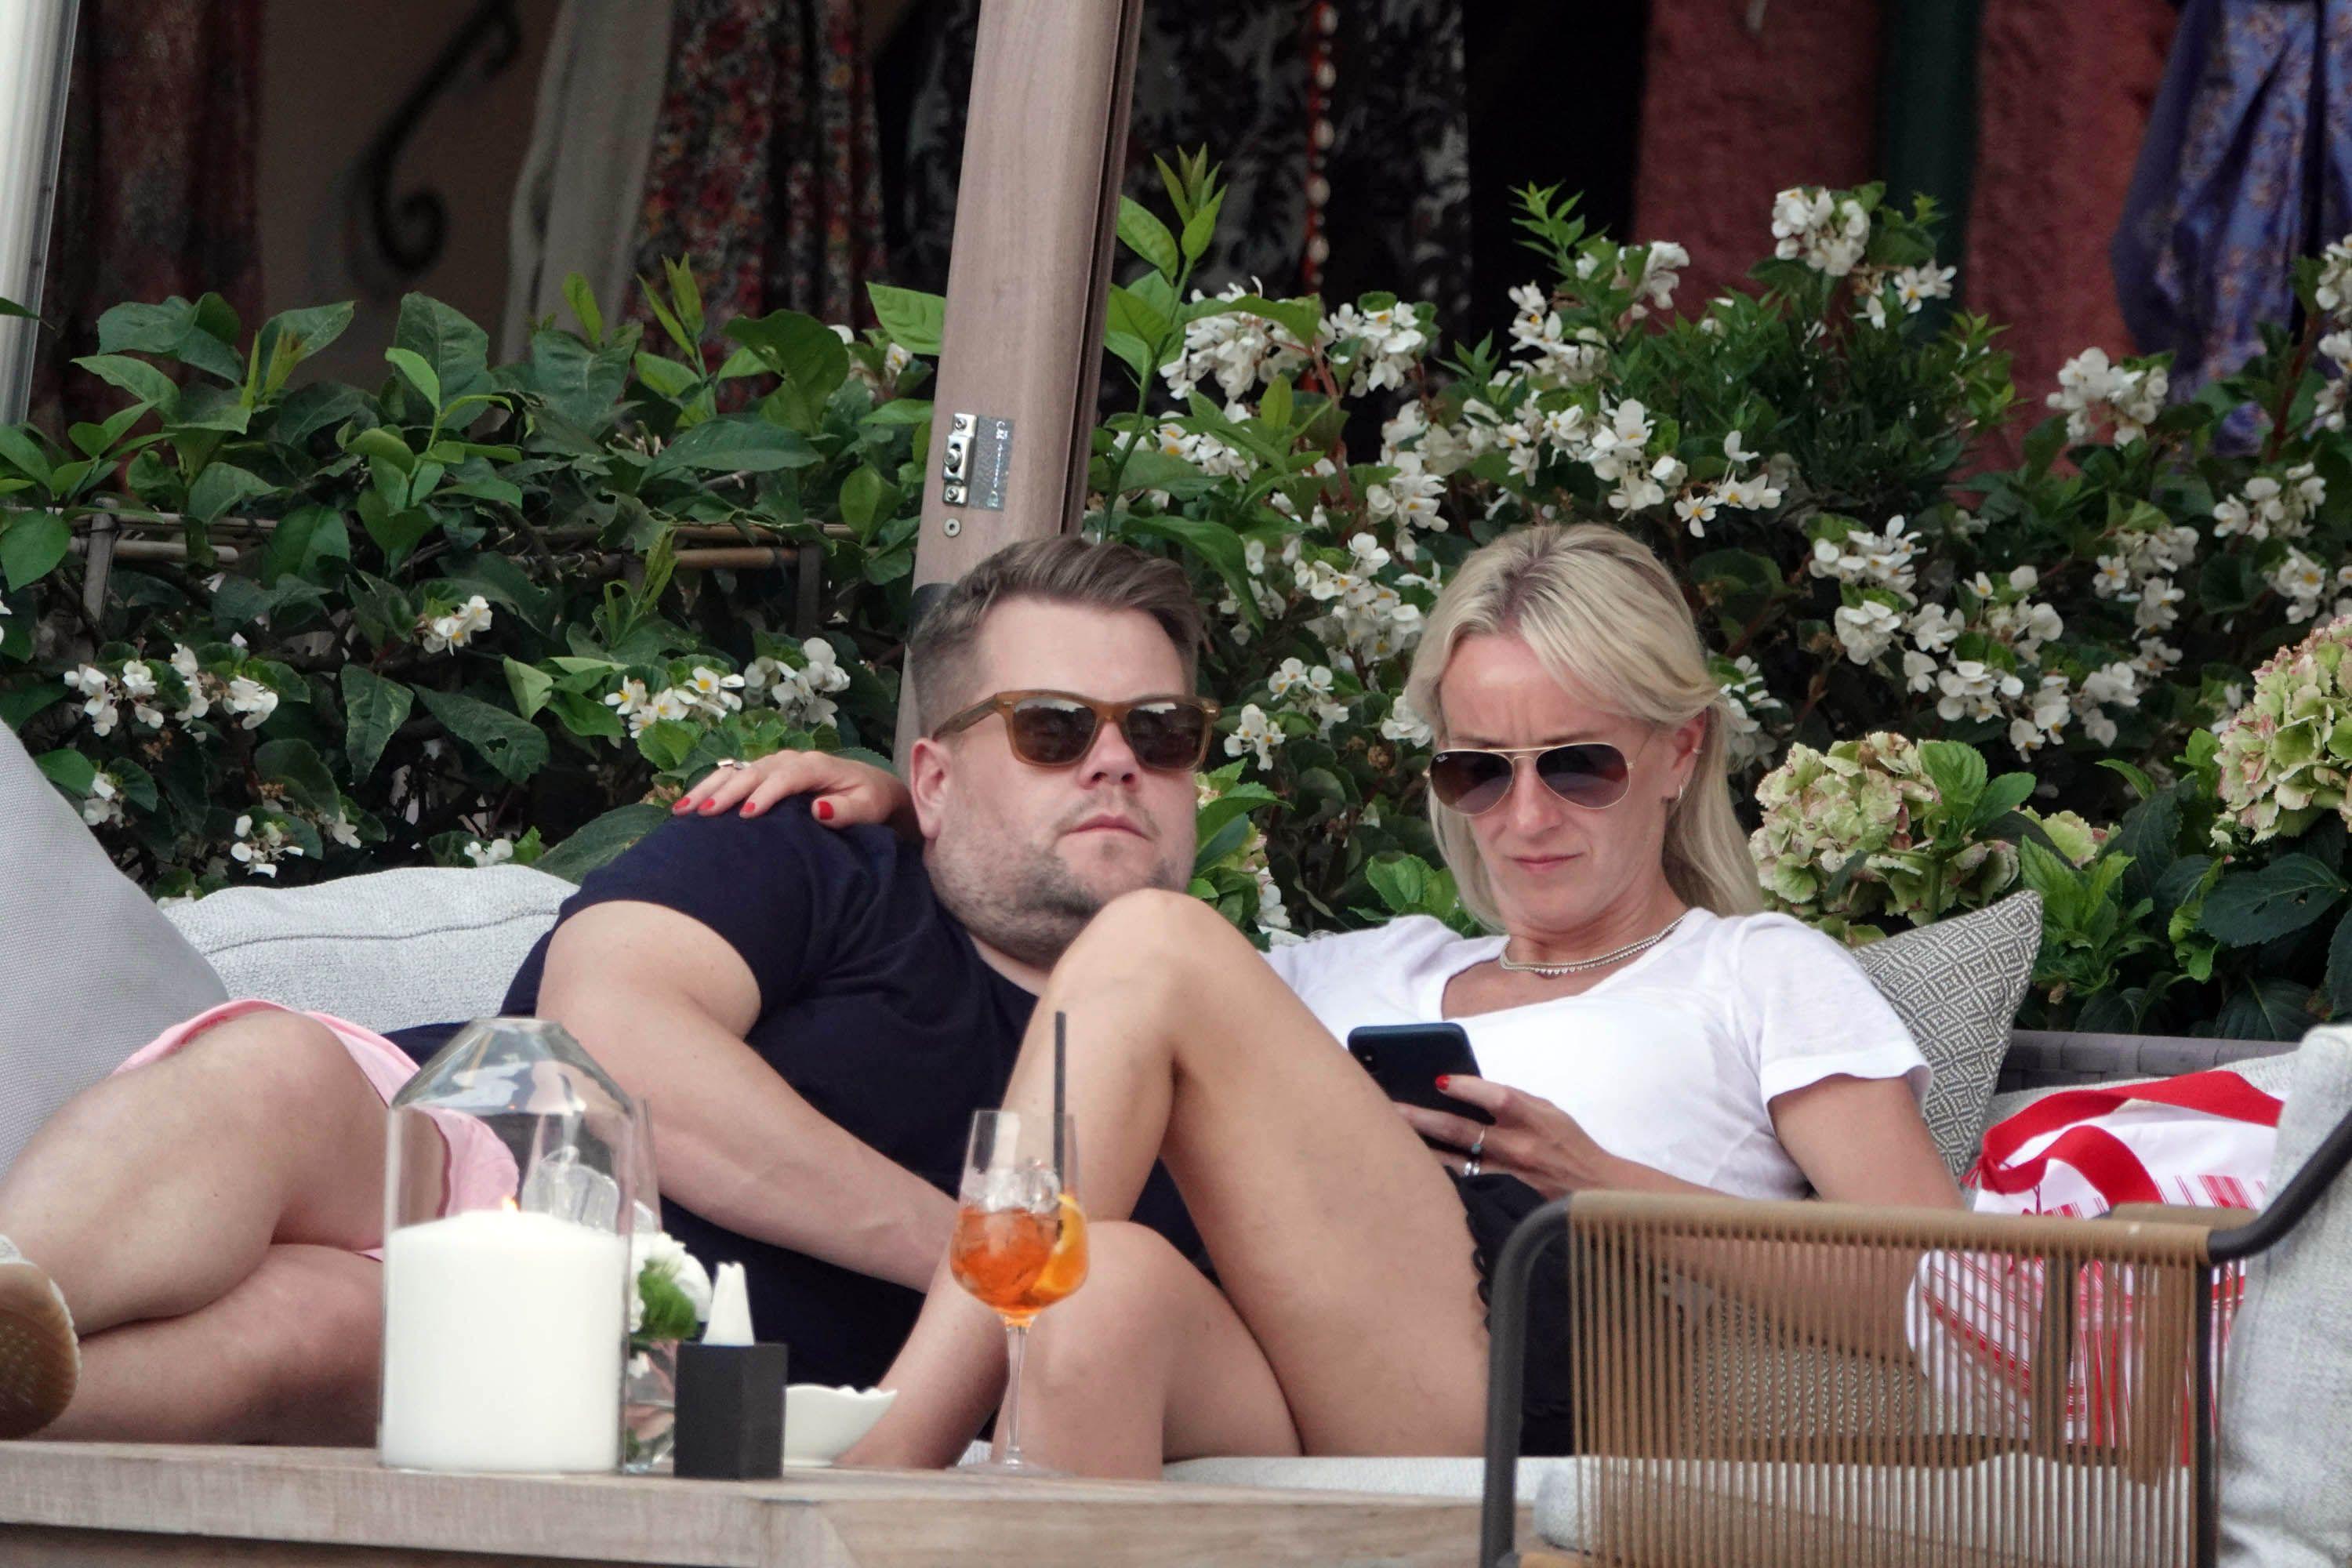 James Corden and Wife Cool Off from ‘Karaoke’ With Italian Vacay